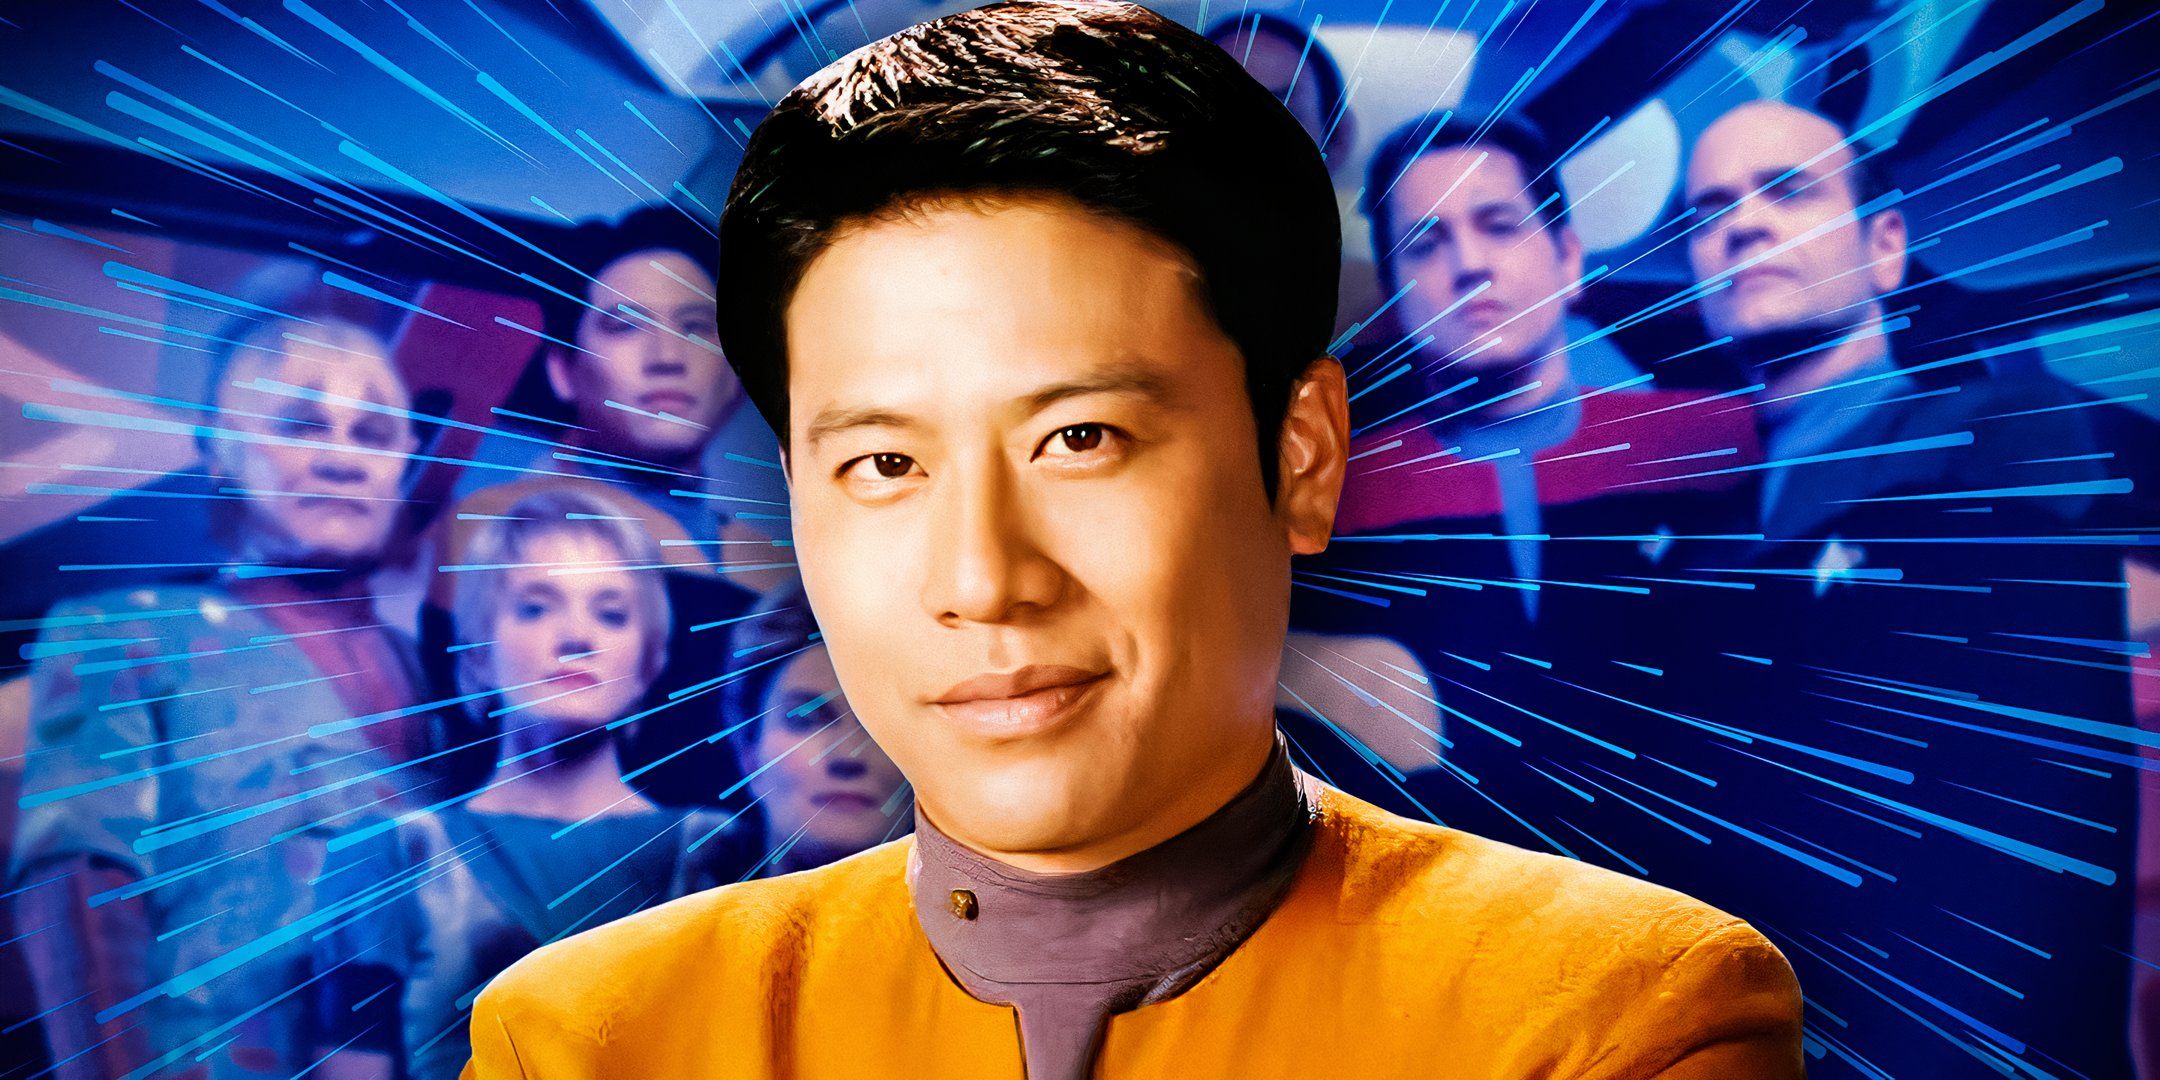 Harry Kim (Garrett Wang) from Star Trek: Voyager with the Voyager season 3 cast in the background.